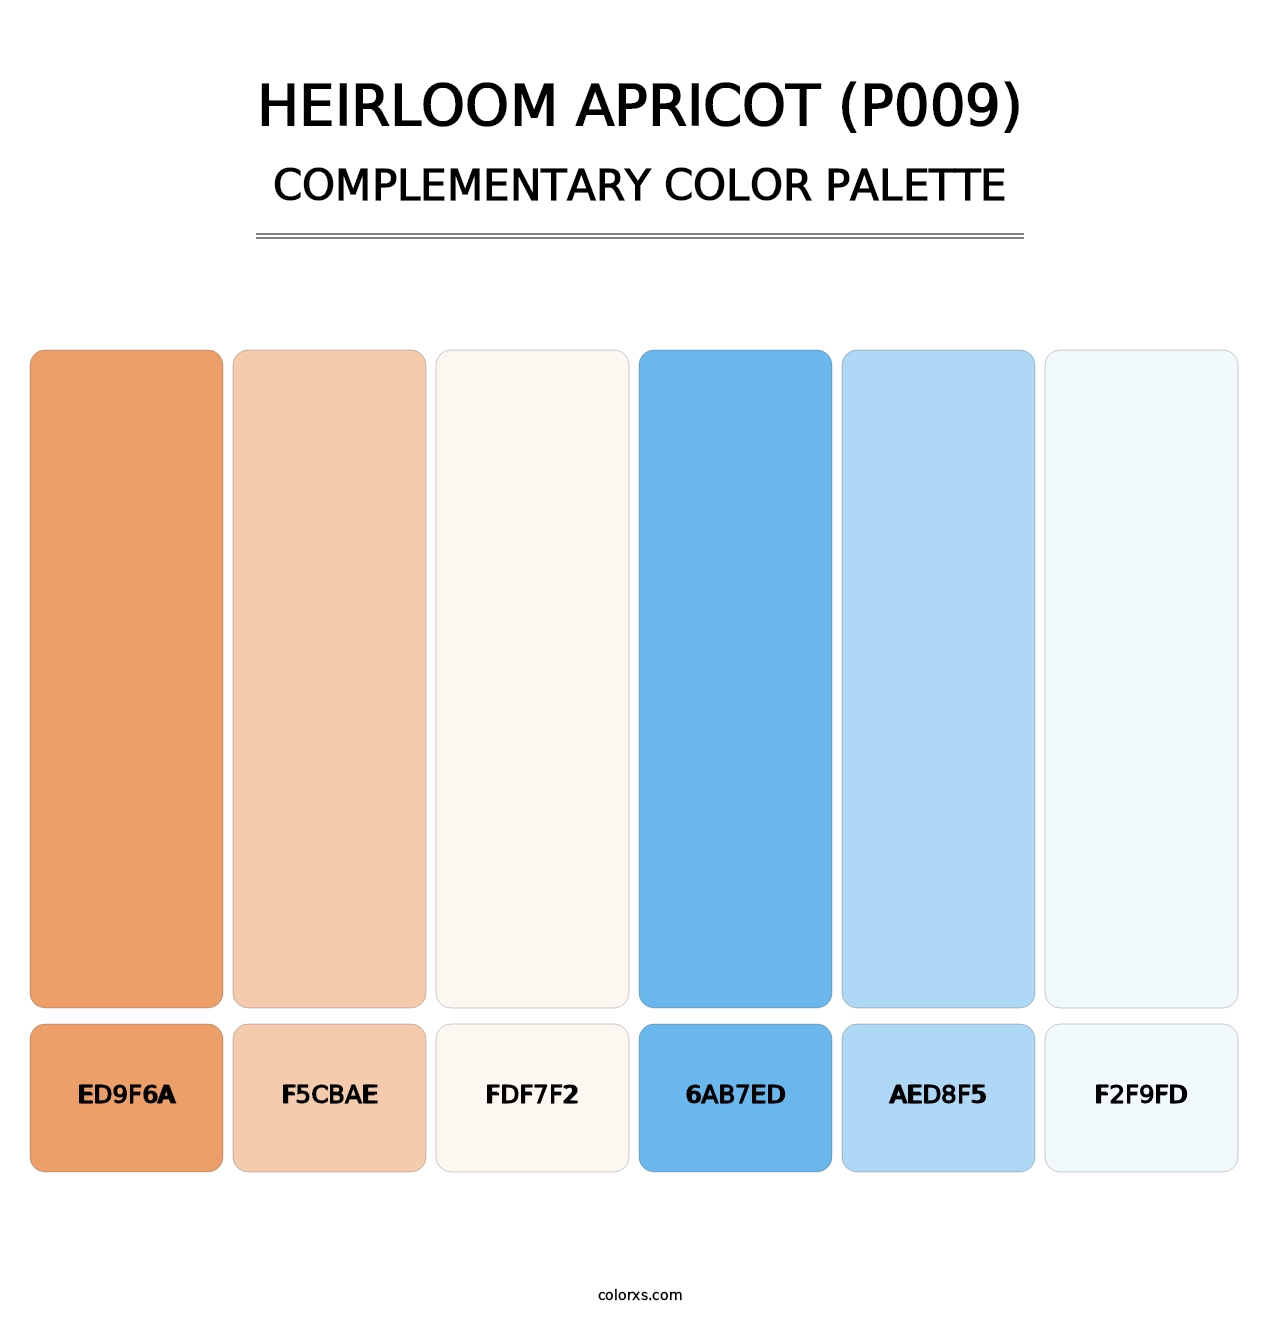 Heirloom Apricot (P009) - Complementary Color Palette